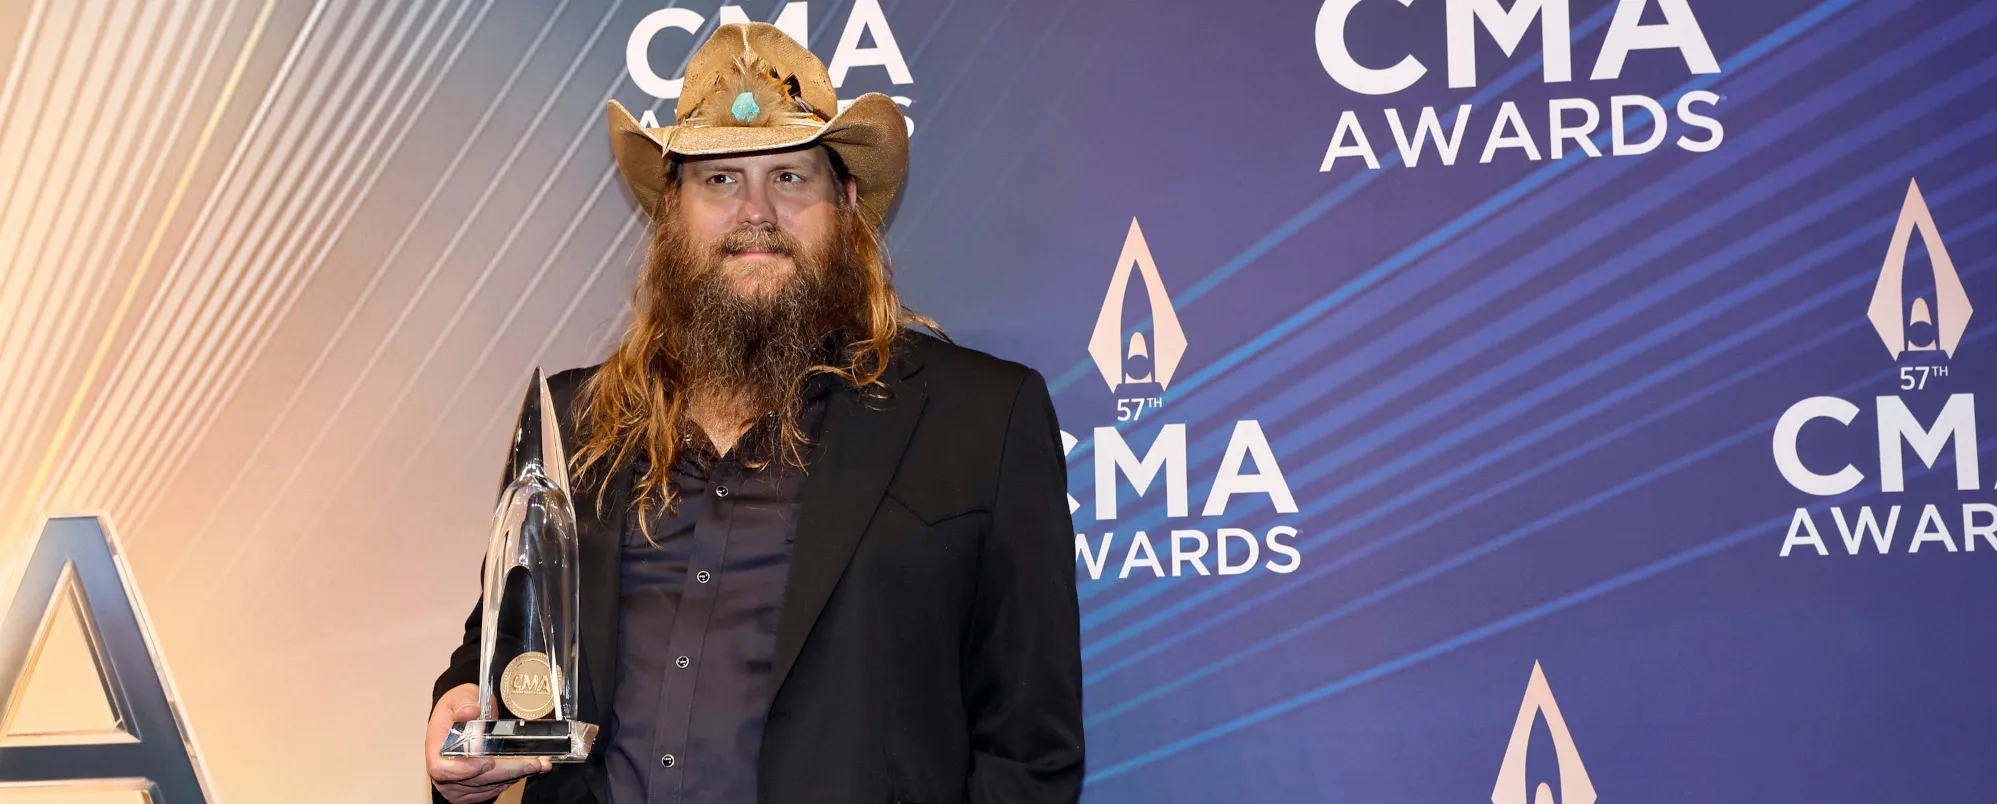 3 Songs You Didn’t Know Chris Stapleton Wrote Solo